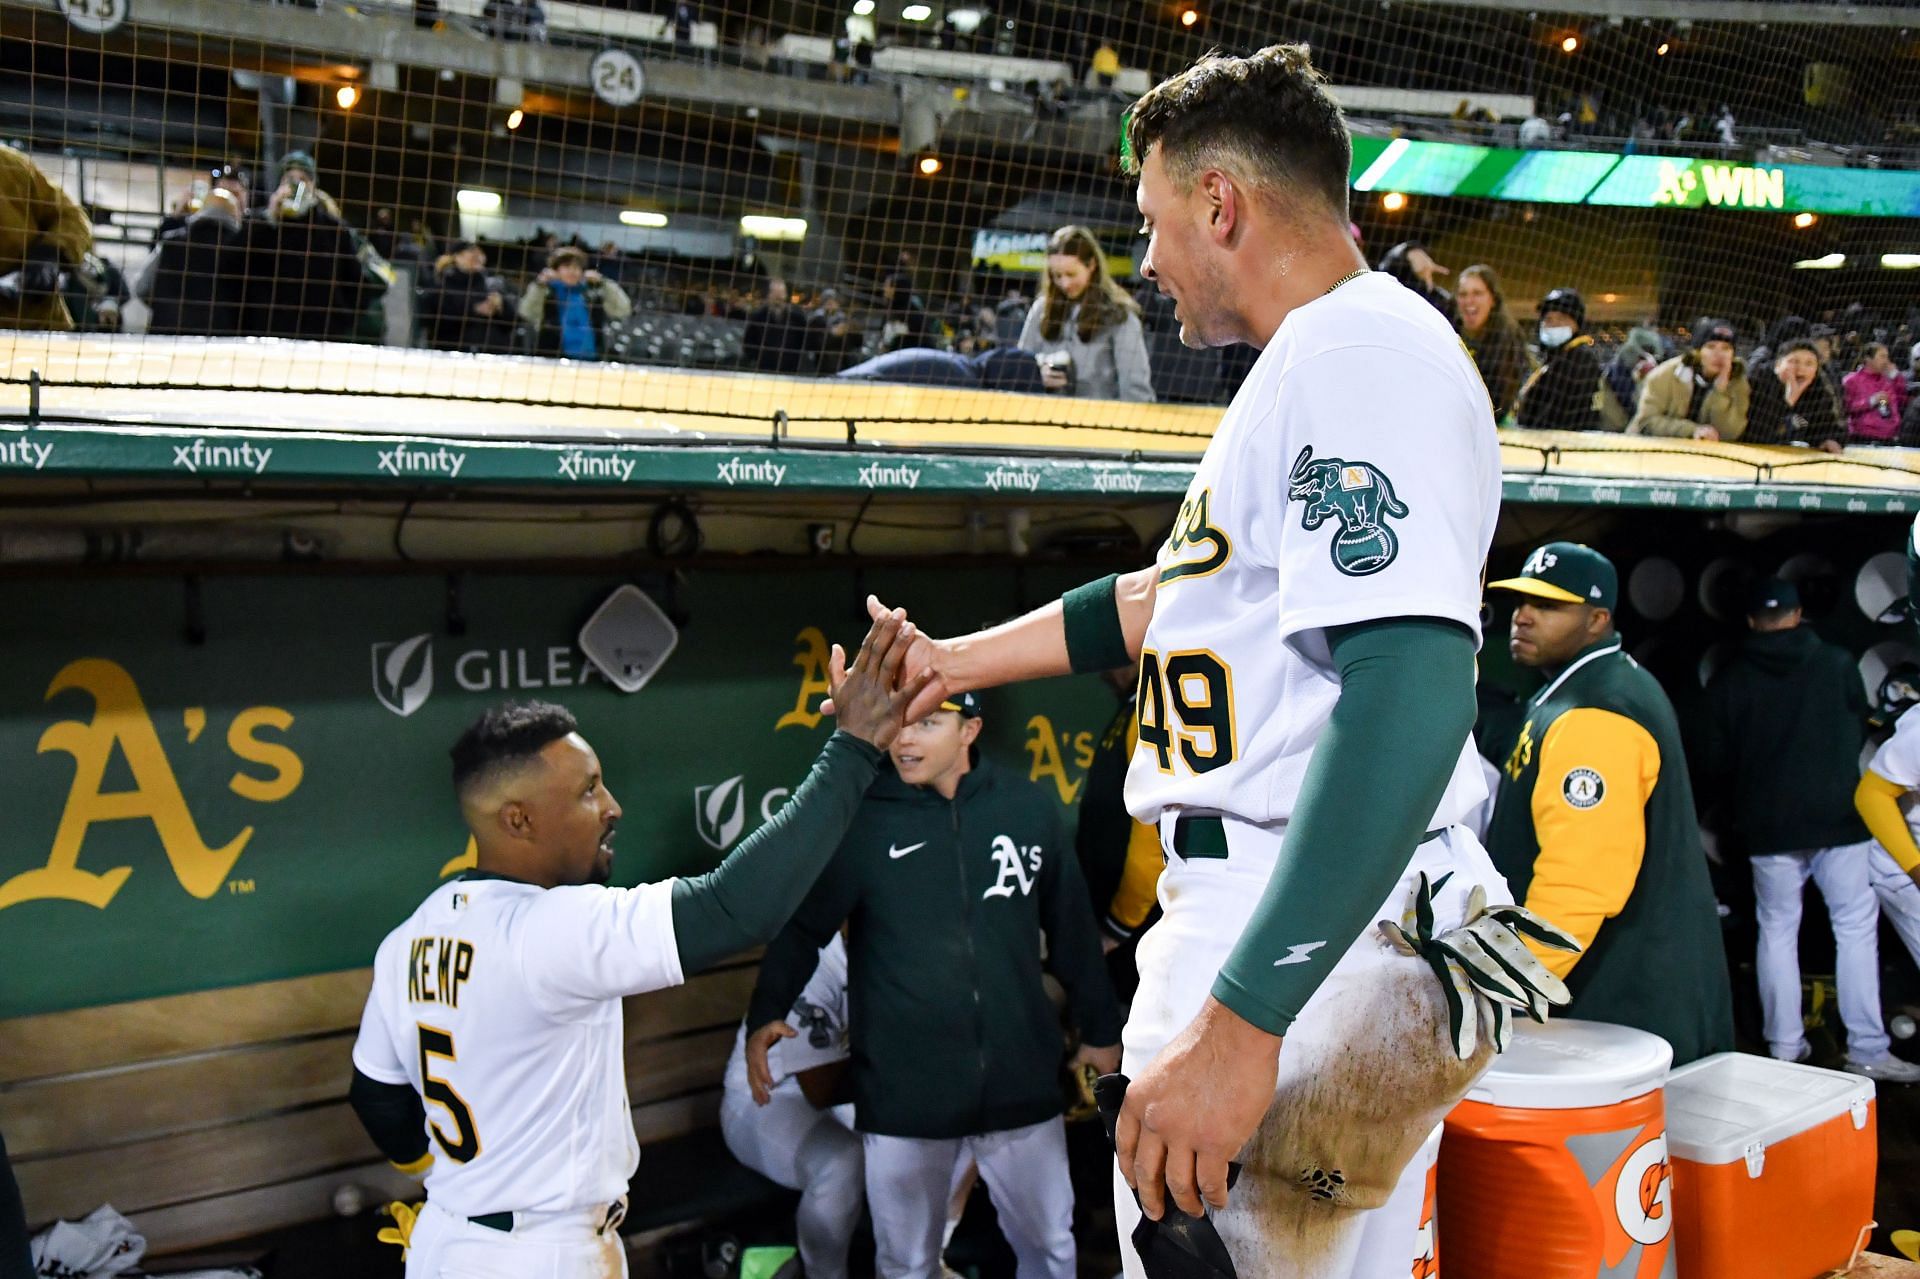 MLB fans roast another Oakland Athletics roster teardown - Such a poverty  franchise. That front office is an absolute joke